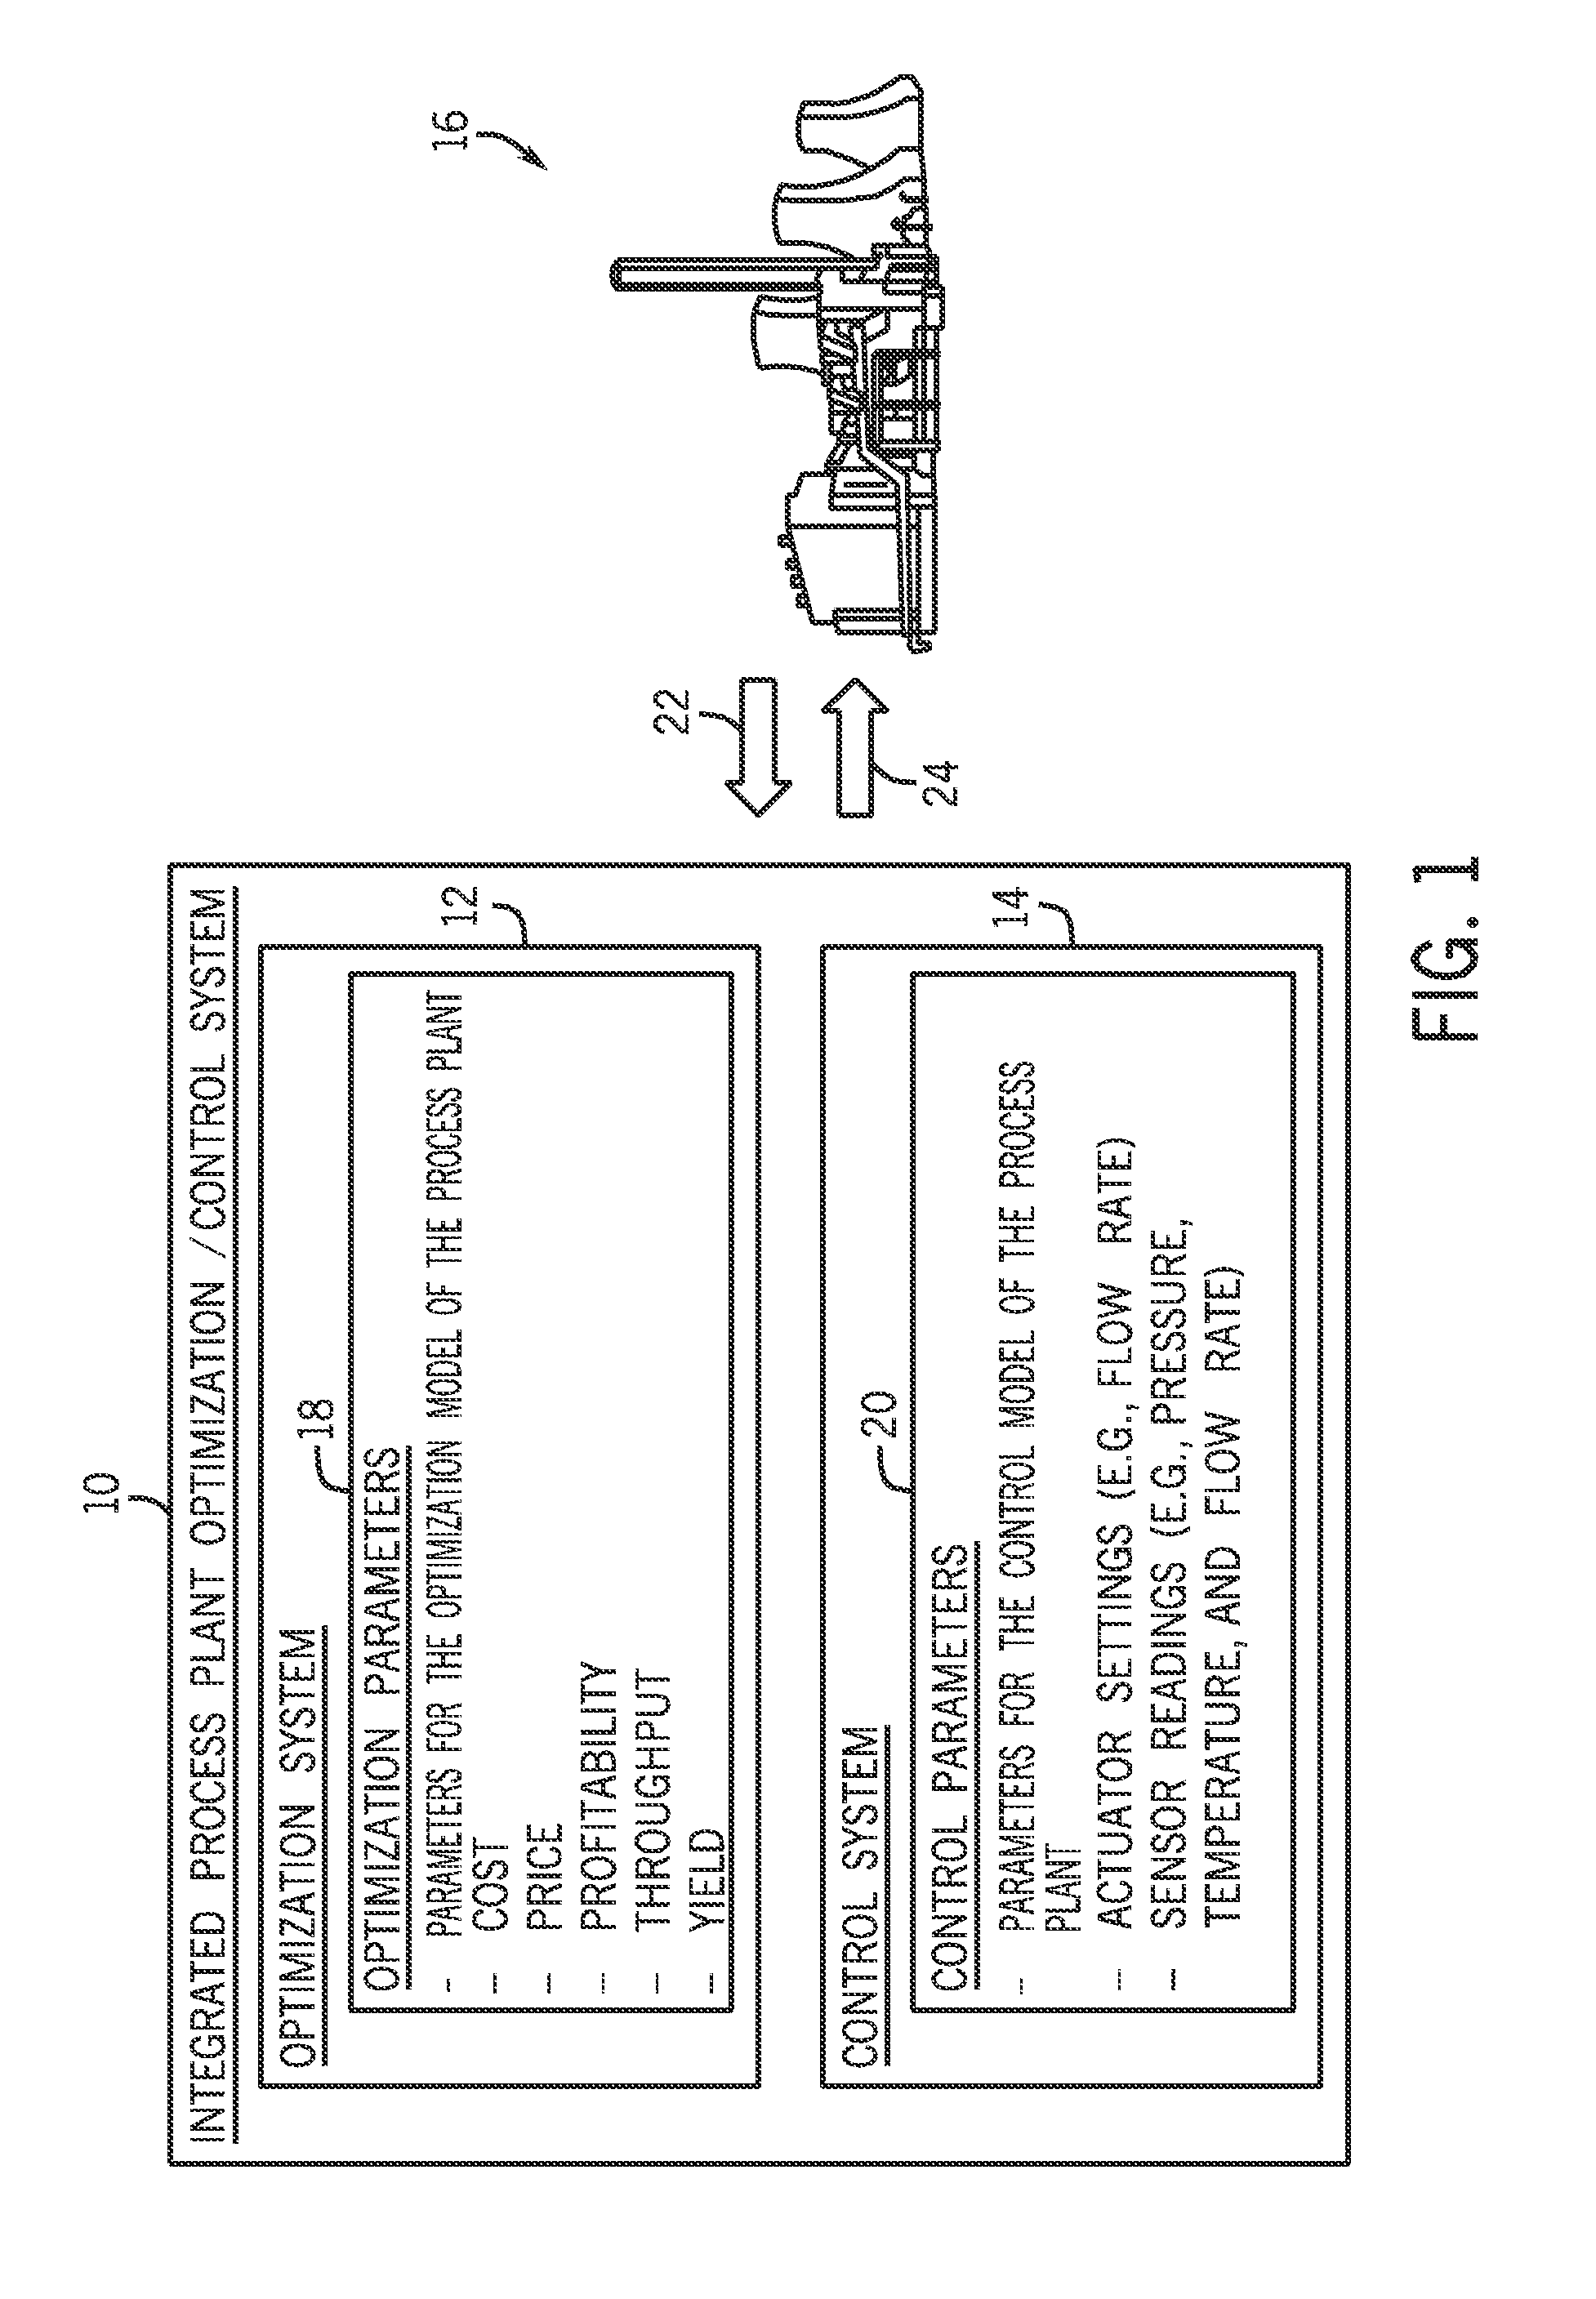 Integrated optimization and control for production plants